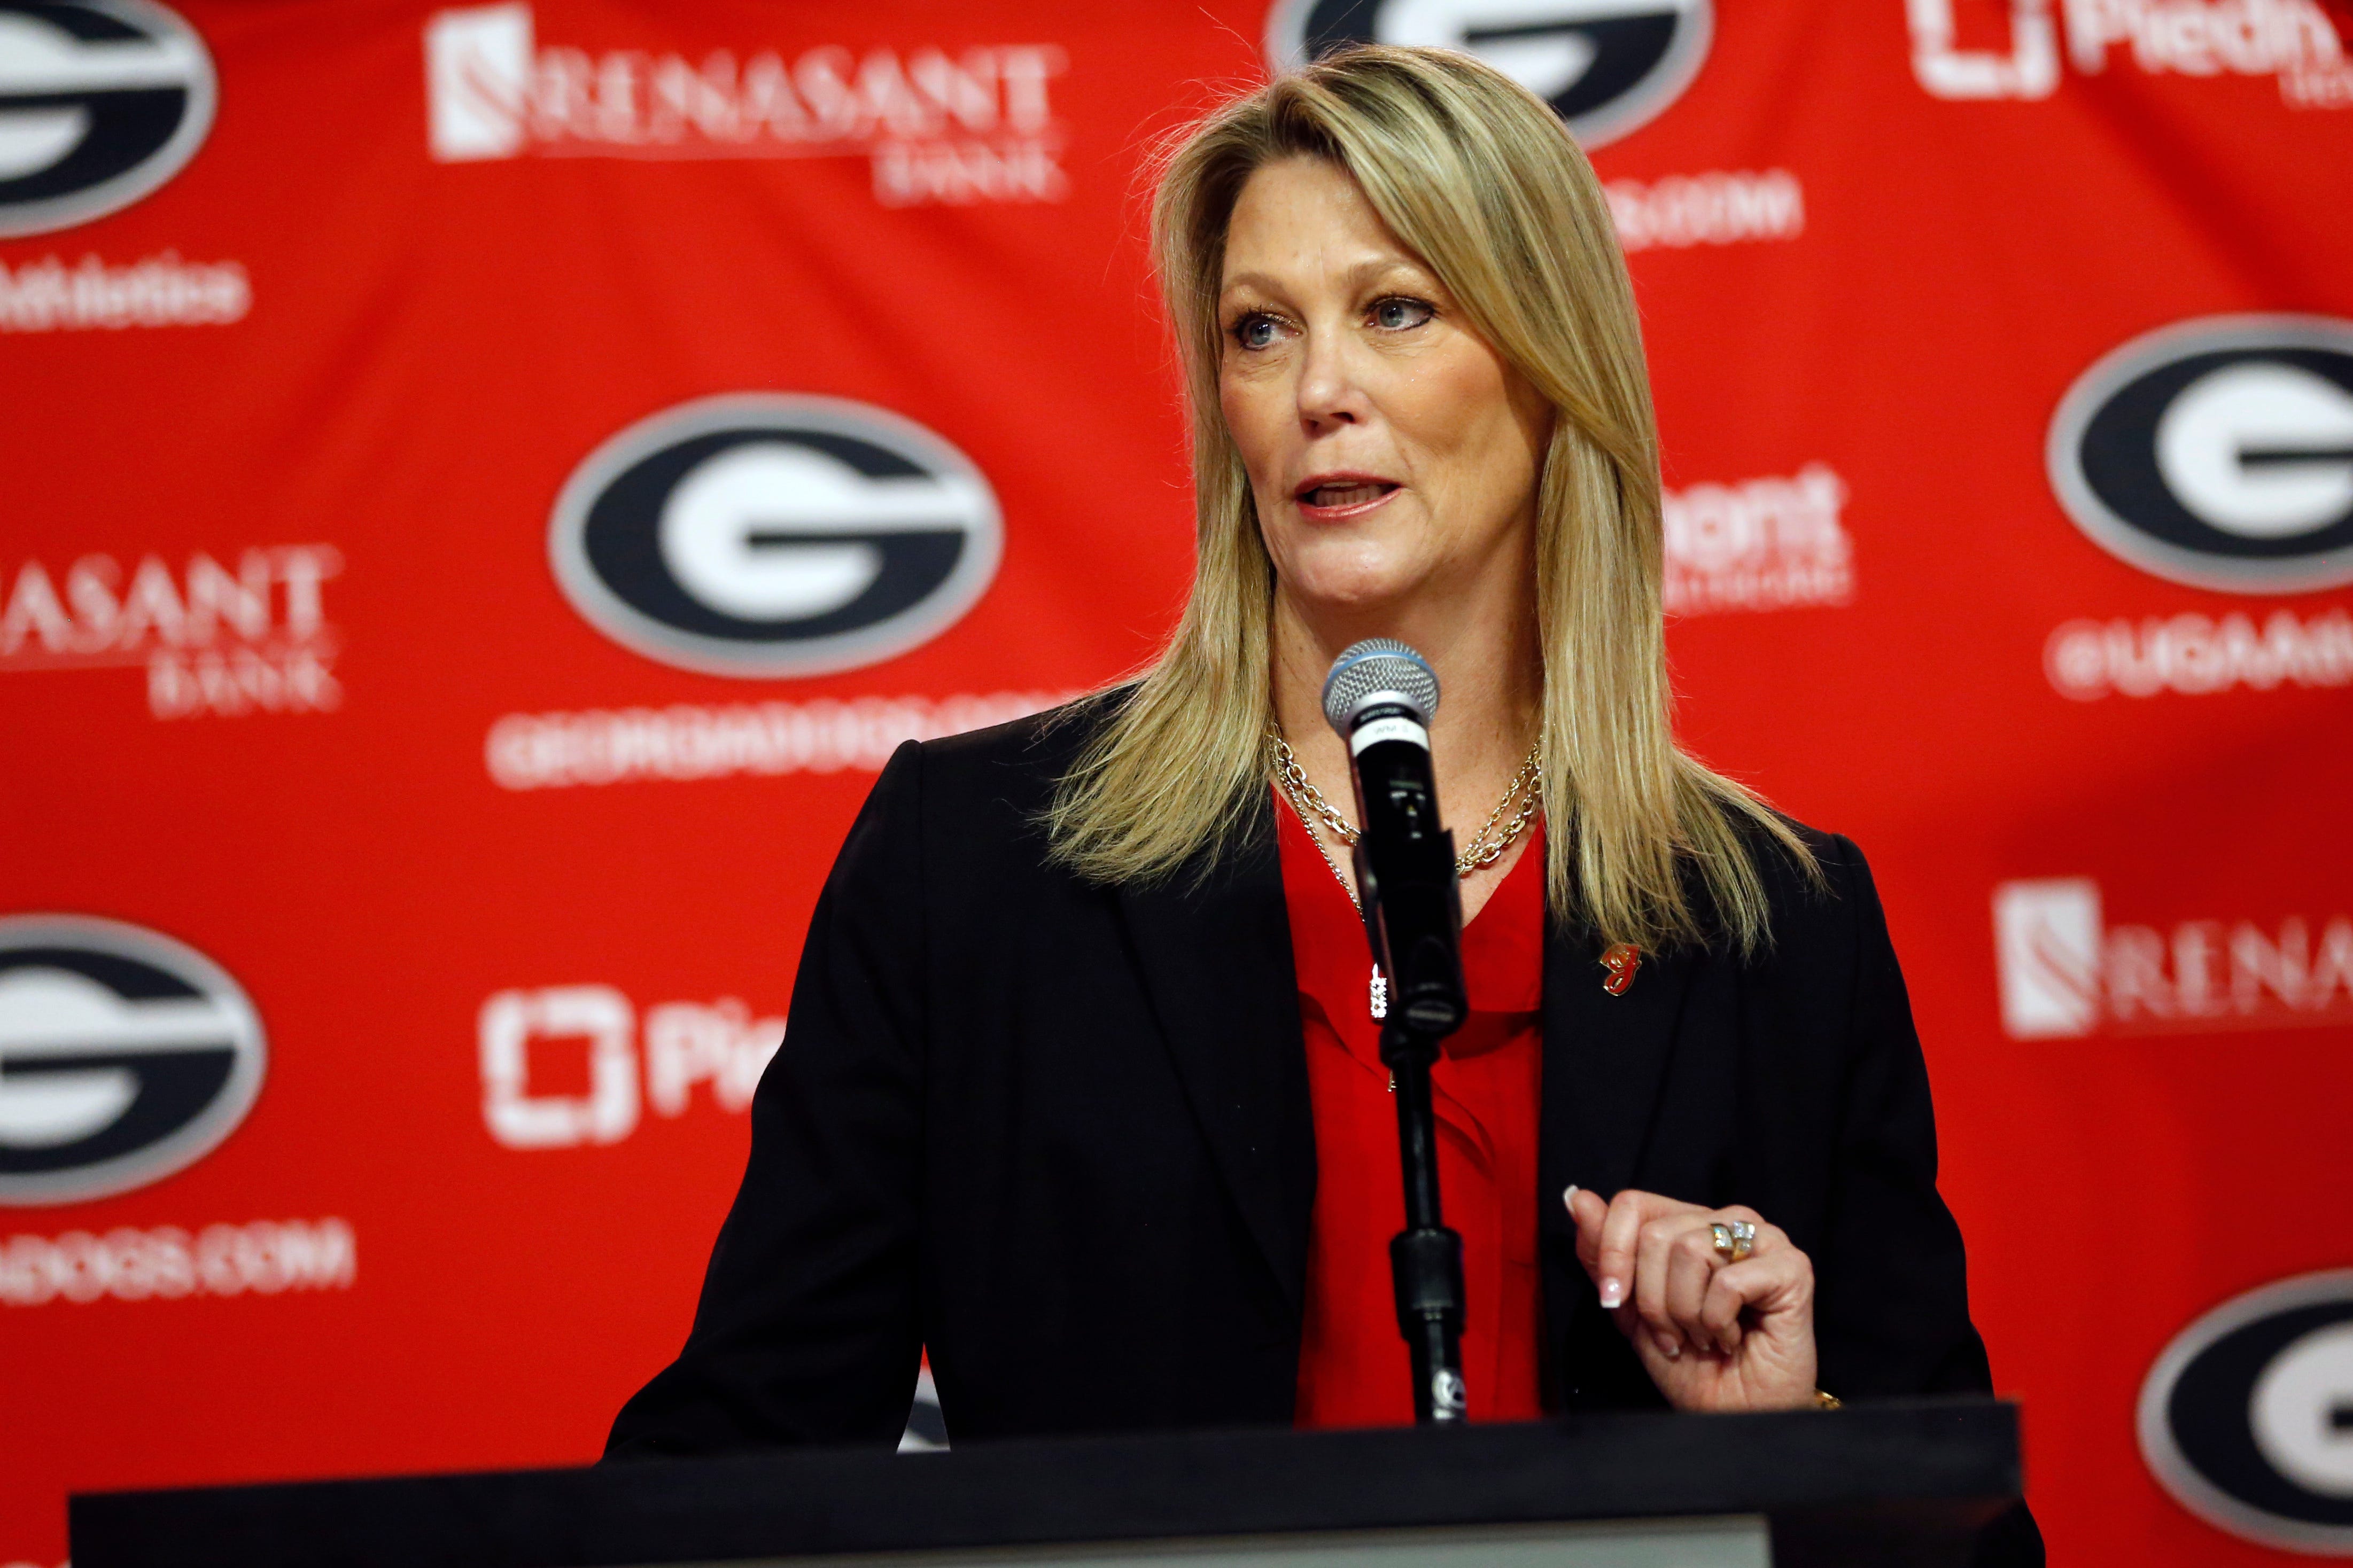 Georgia Basketball: How much is Abrahamson-Henderson making at UGA?